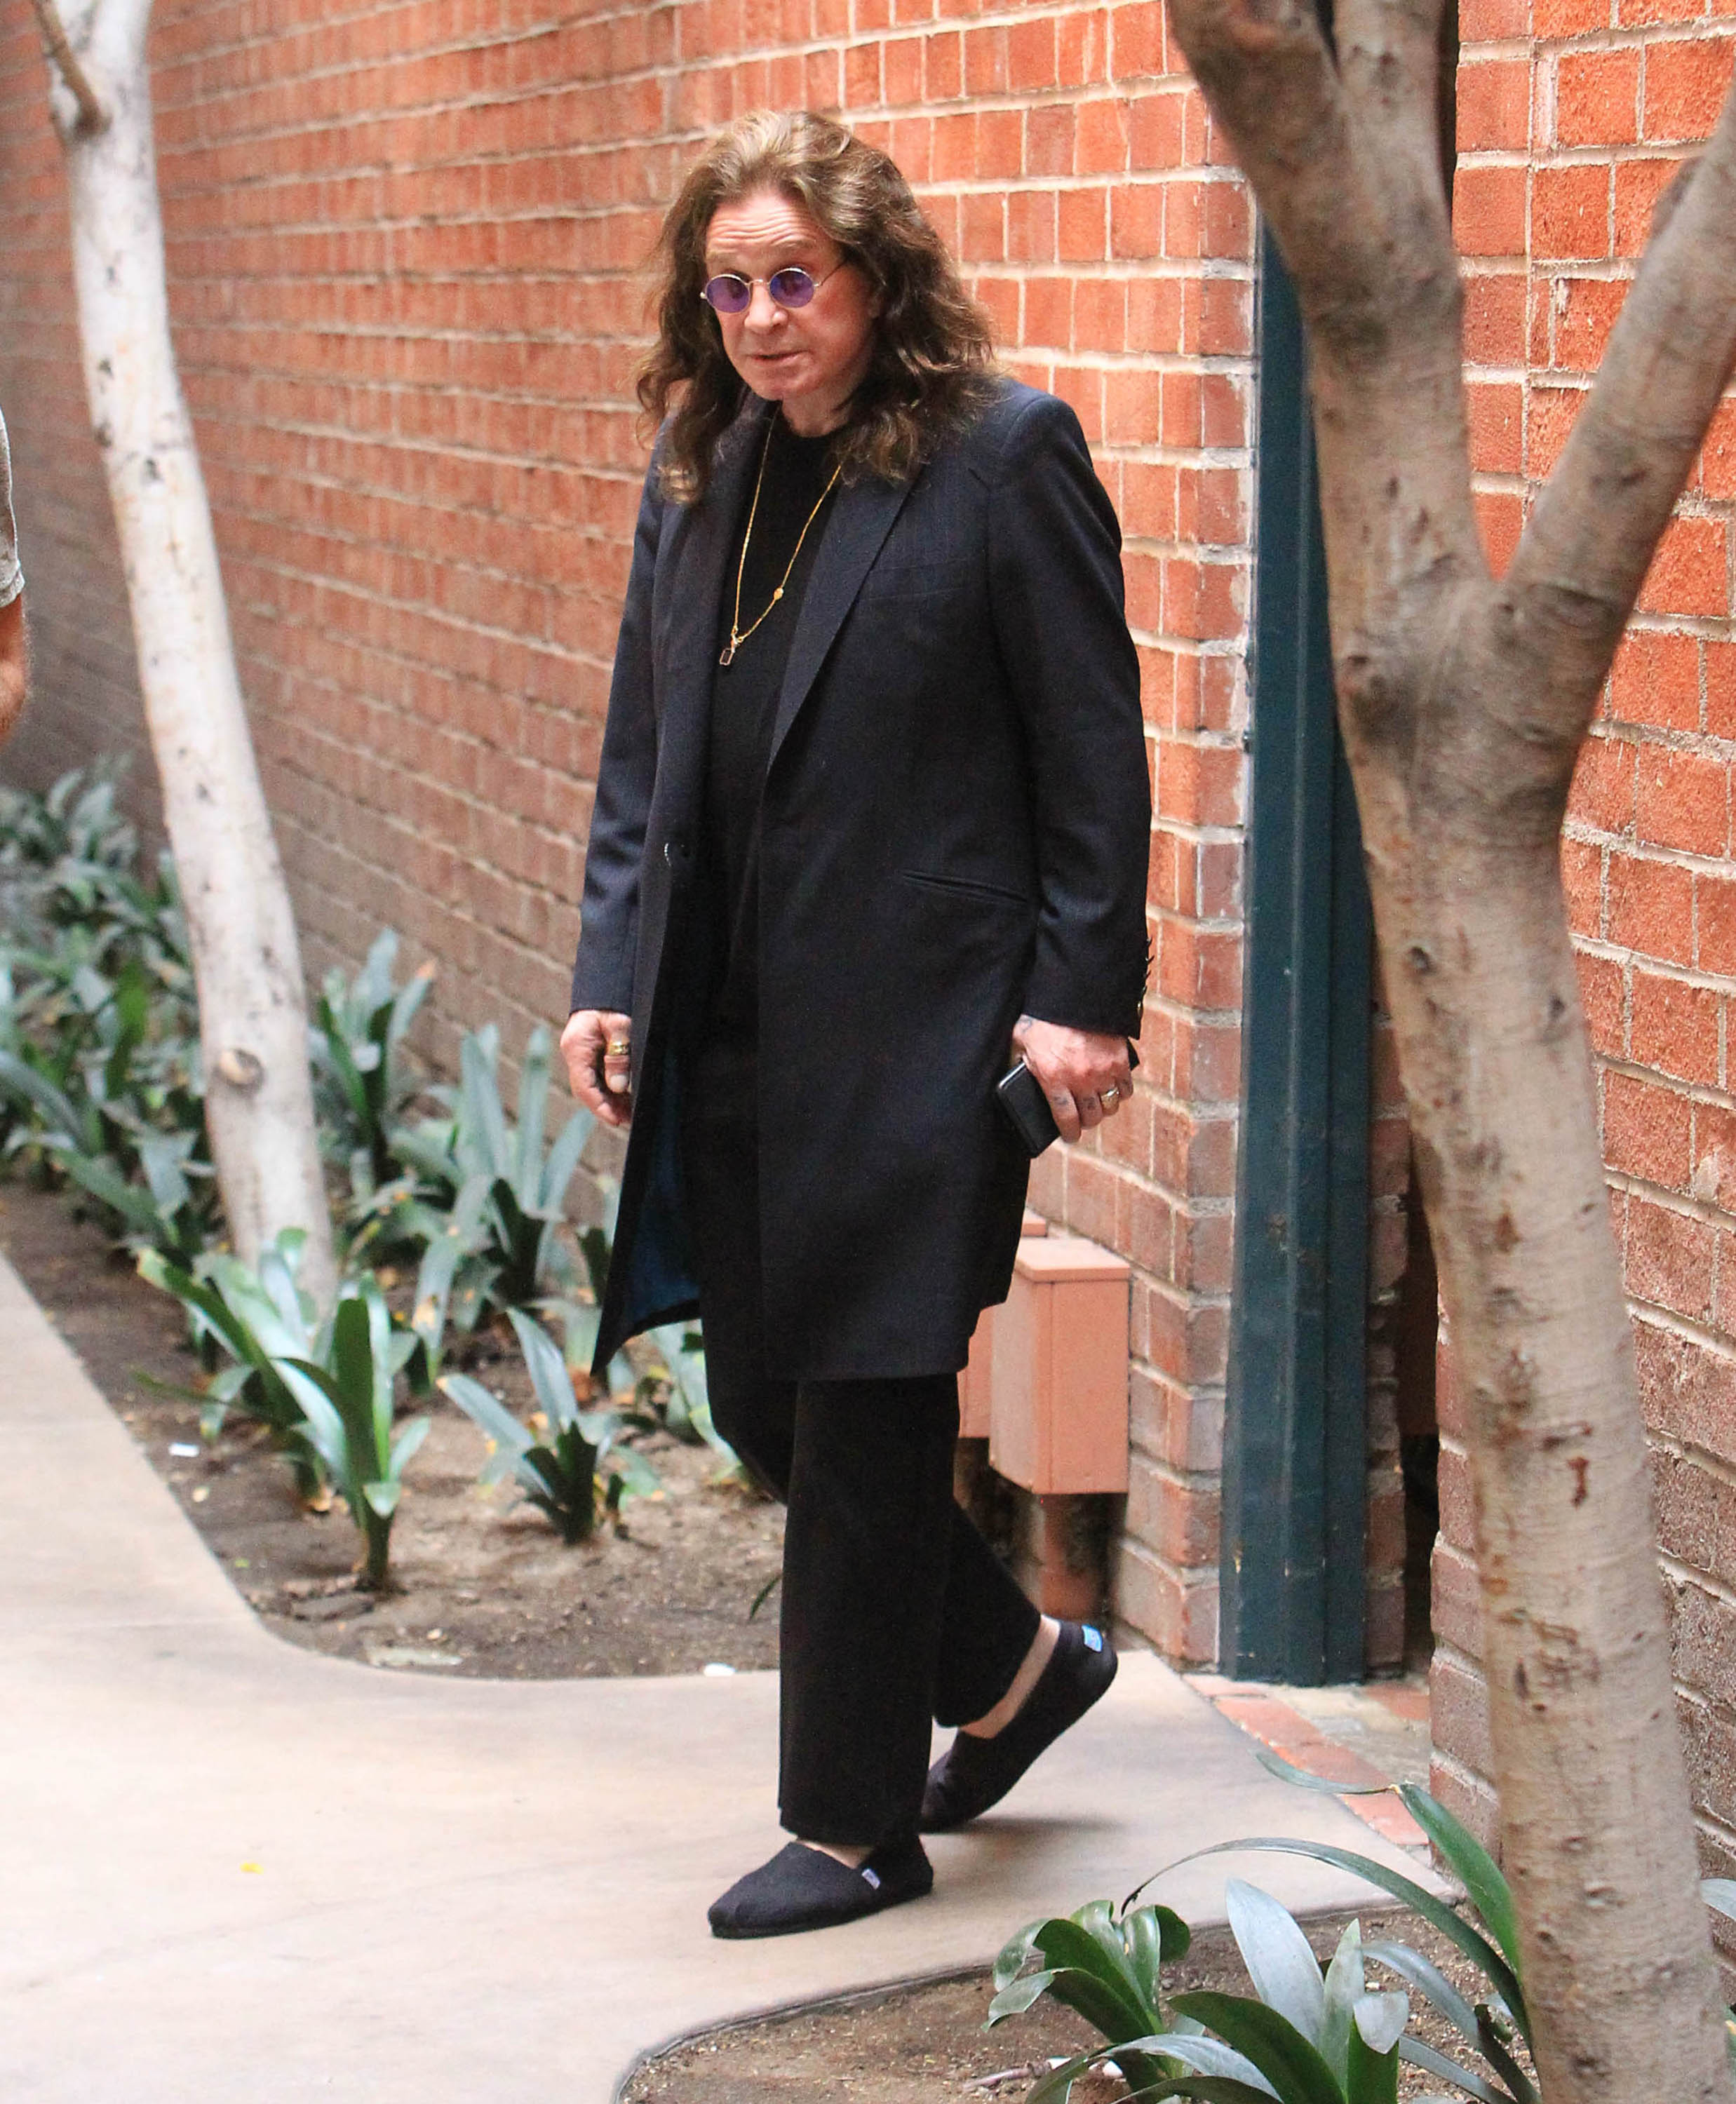 Ozzy Osbourne is seen on November 2, 2017 in Los Angeles, California | Source: Getty Images